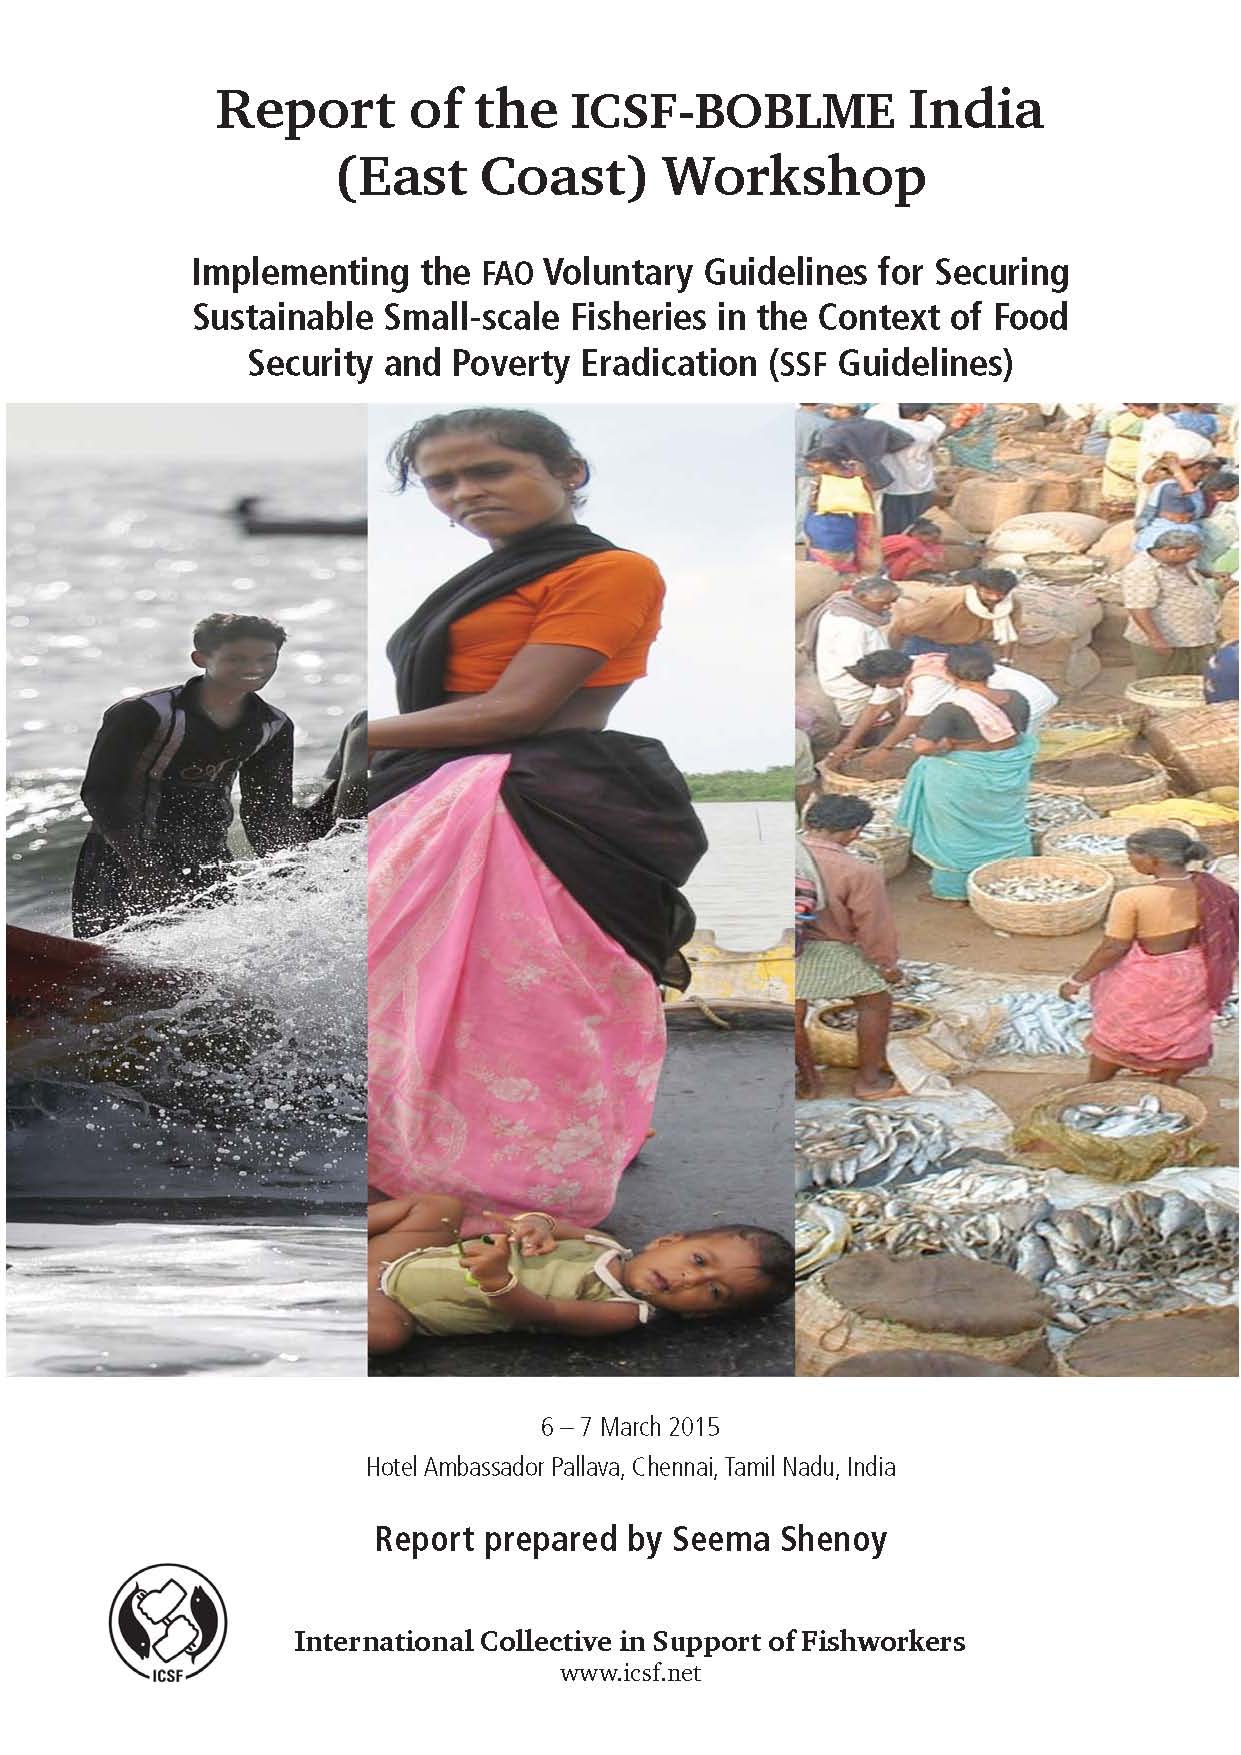 Report of the ICSF-BOBLME India (East Coast) Workshop: Implementing the FAO Voluntary Guidelines for Securing Sustainable Small-scale Fisheries in the Context of Food Security and Poverty Eradication (SSF Guidelines), 6-7 March 2015, Chennai, India Report prepared by Seema Shenoy